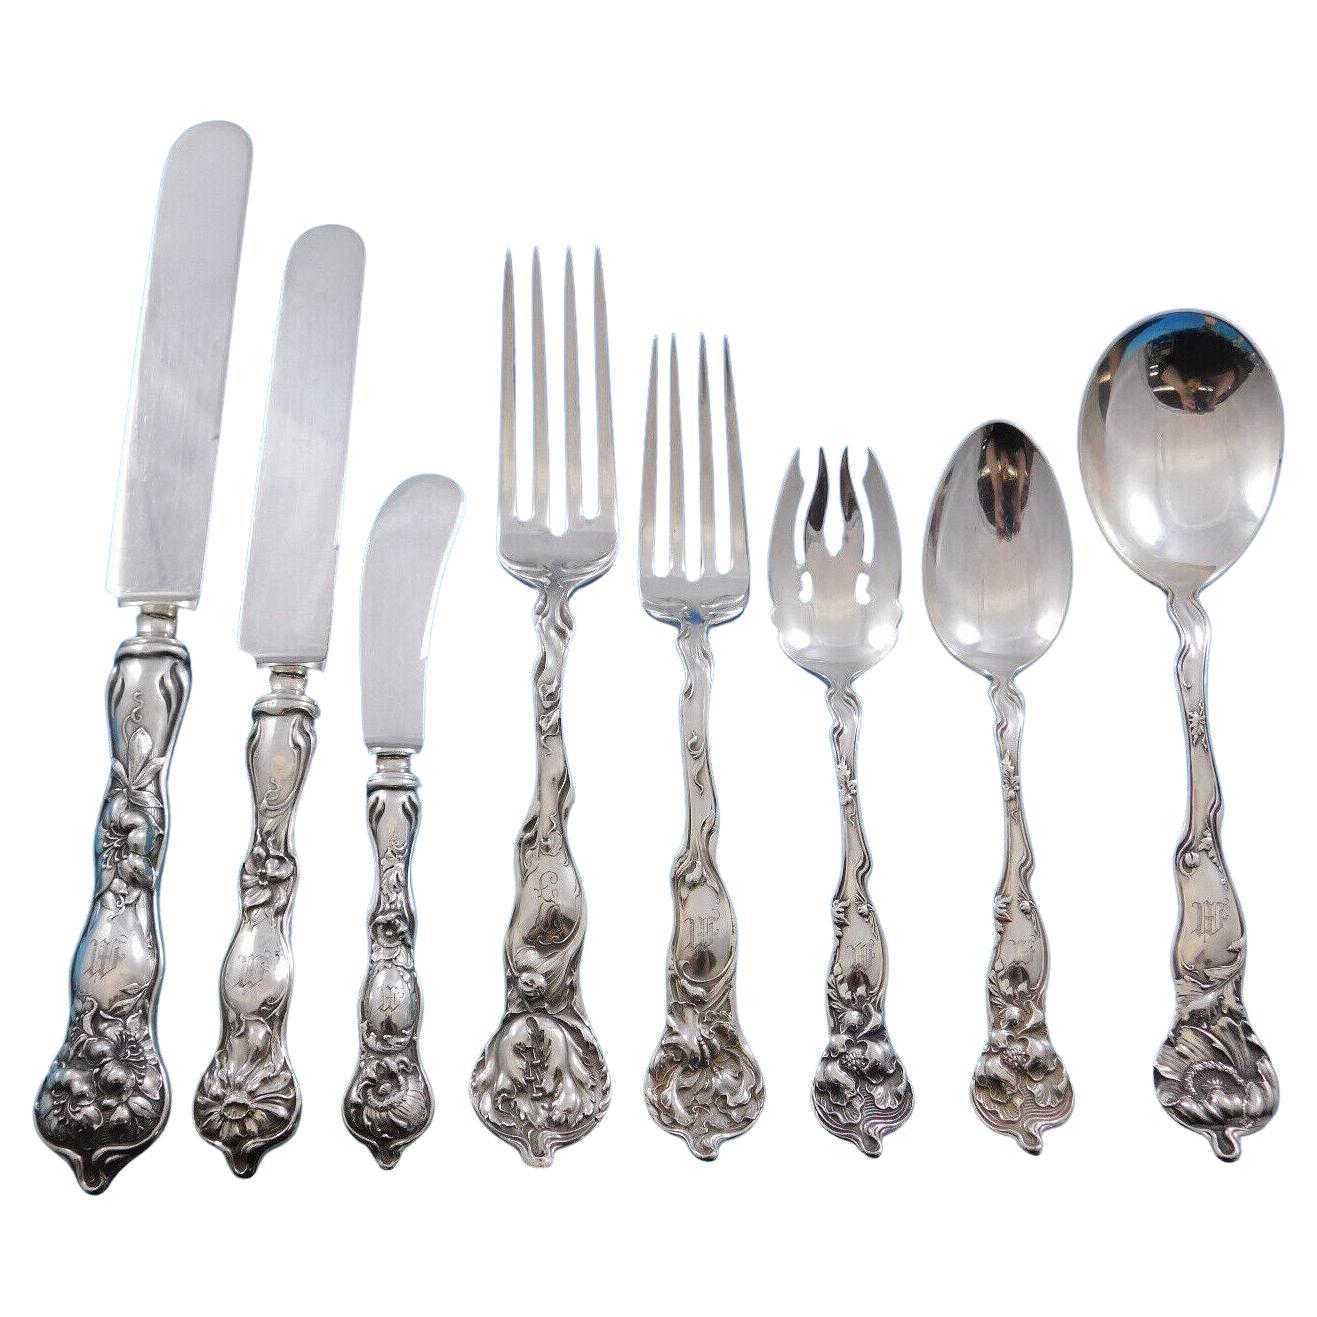 Fiorito by Shiebler Sterling Silver Flatware Set for 12 Service 102 Pcs Dinner